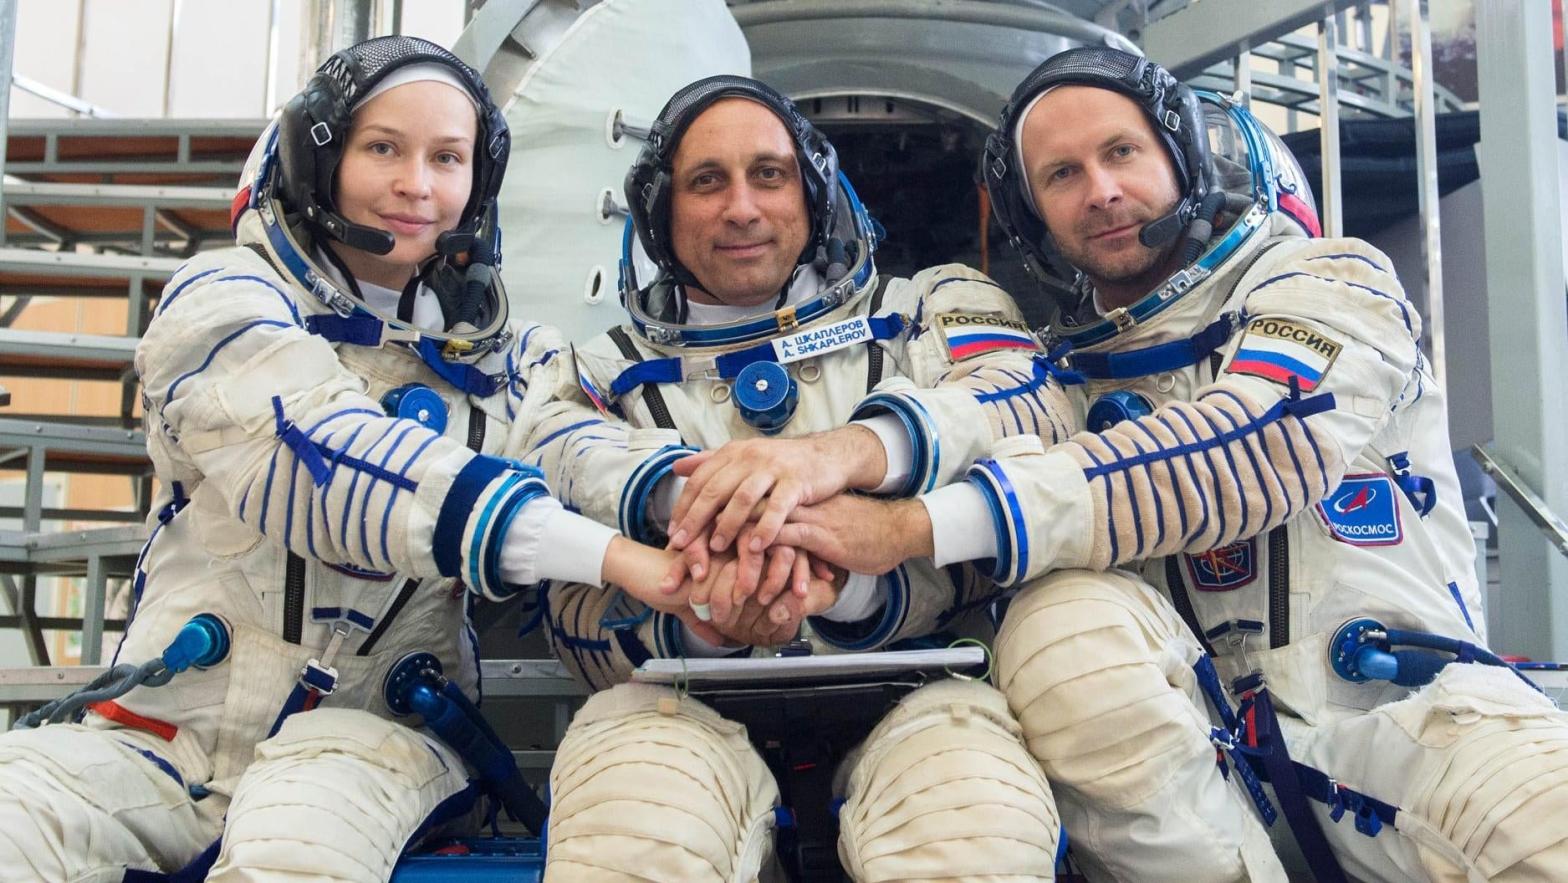 Members of the ISS-66 mission. From left to right: actor Yulia Peresild, commander Anton Shkaplerov, and film director Klim Shipenko. (Image: Roscosmos)